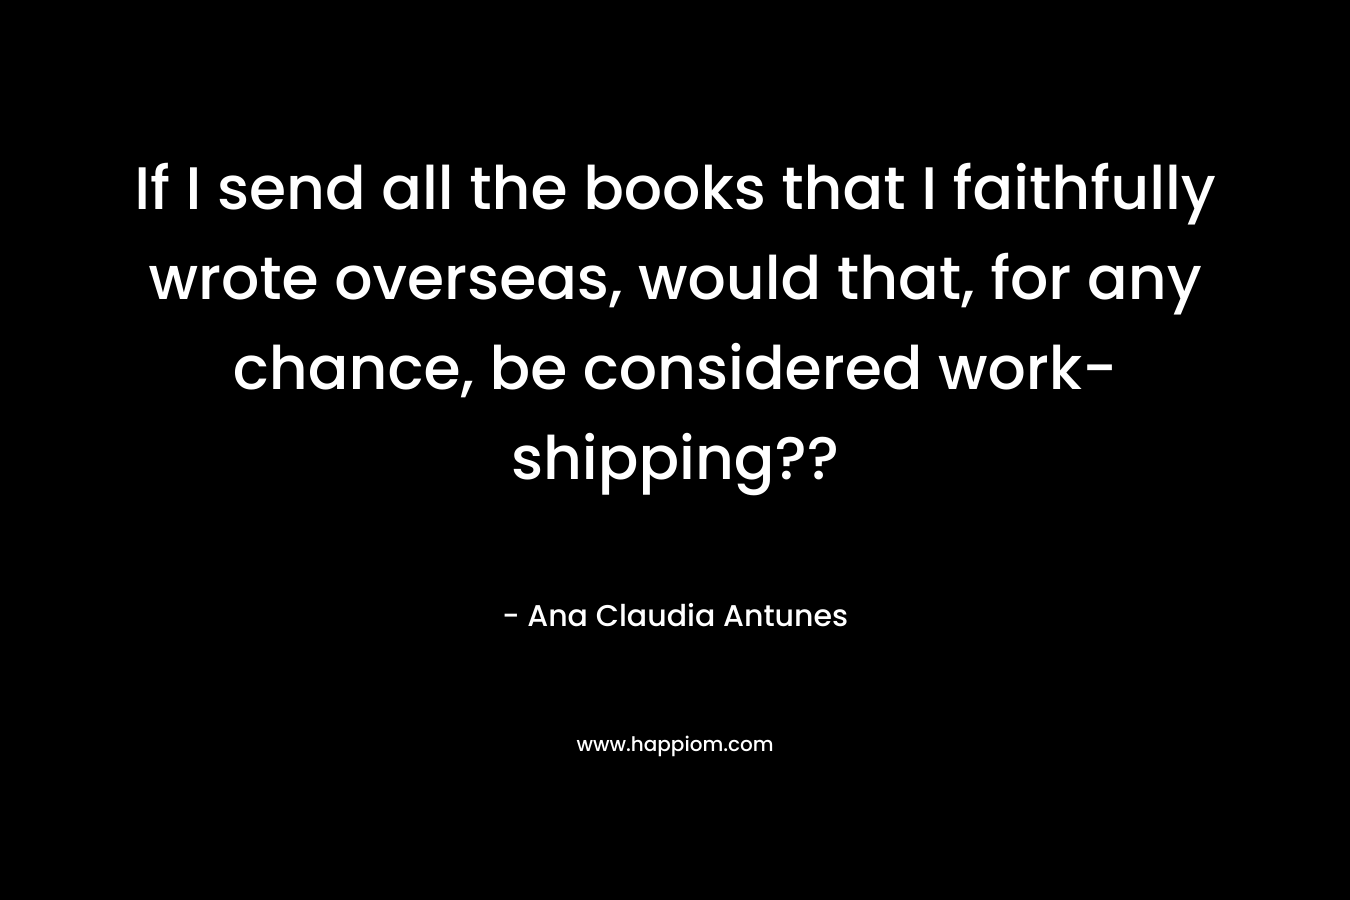 If I send all the books that I faithfully wrote overseas, would that, for any chance, be considered work-shipping??